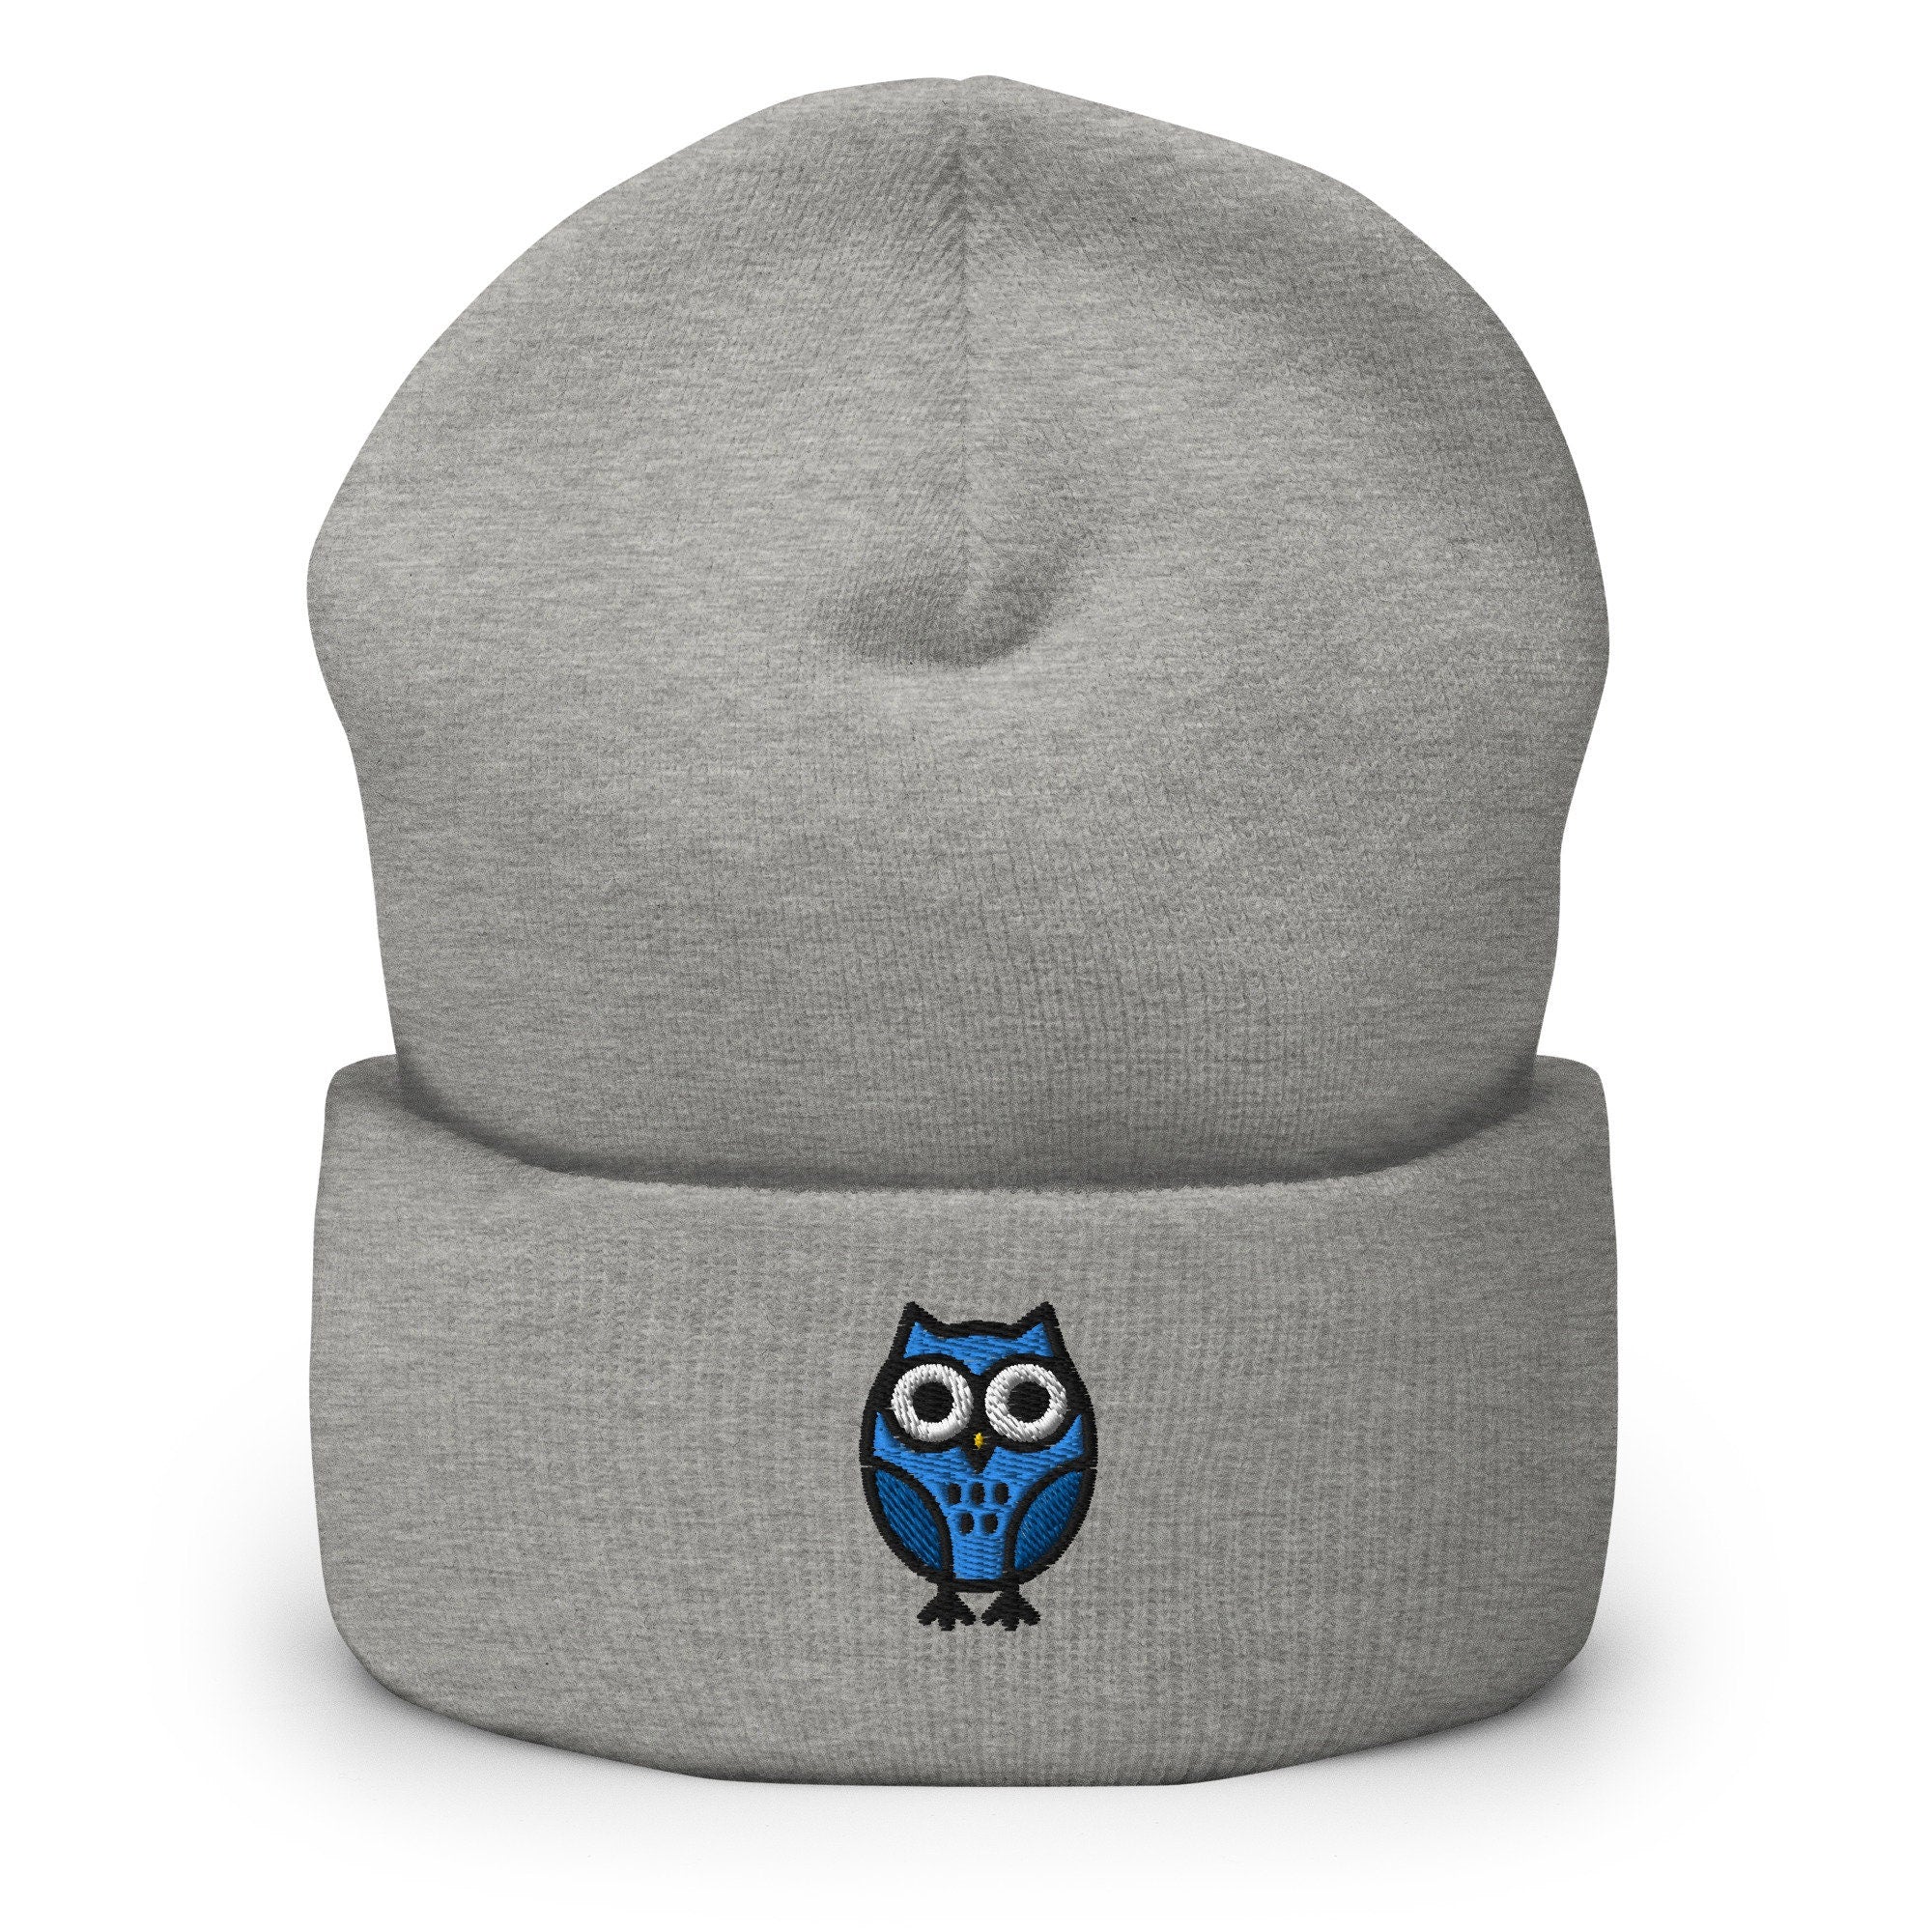 Blue Owl Embroidered Beanie, Handmade Cuffed Knit Unisex Slouchy Adult Winter Hat Cap Gift